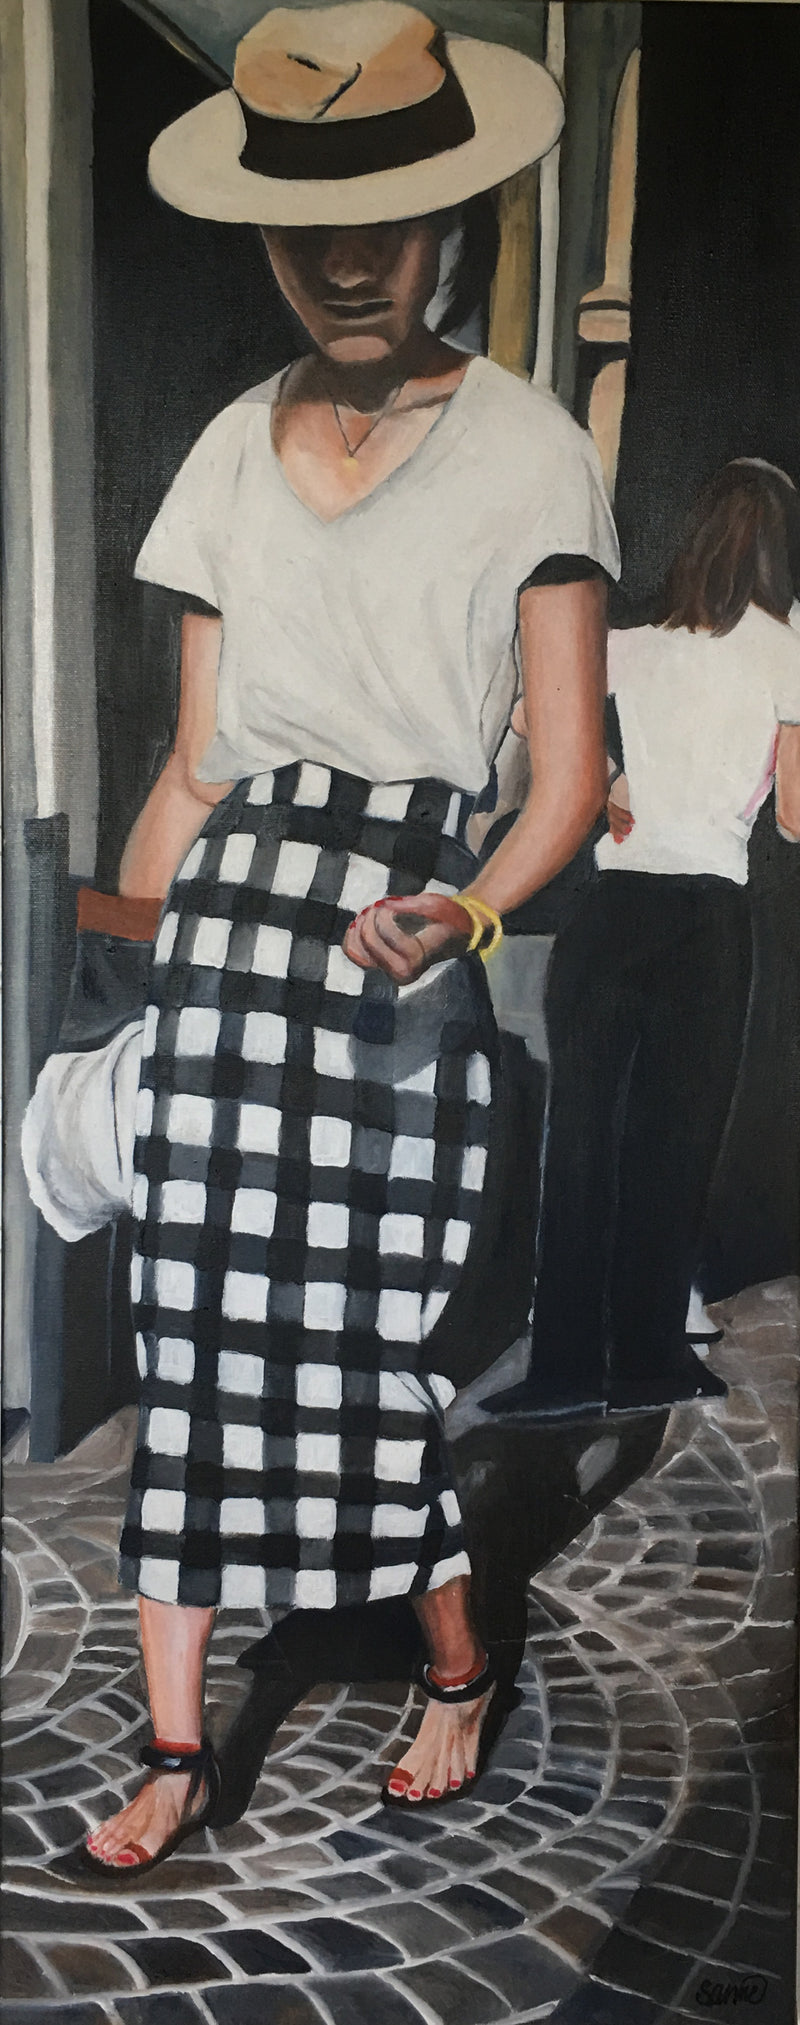 Without title - Original Oil On Canvas (40x100)